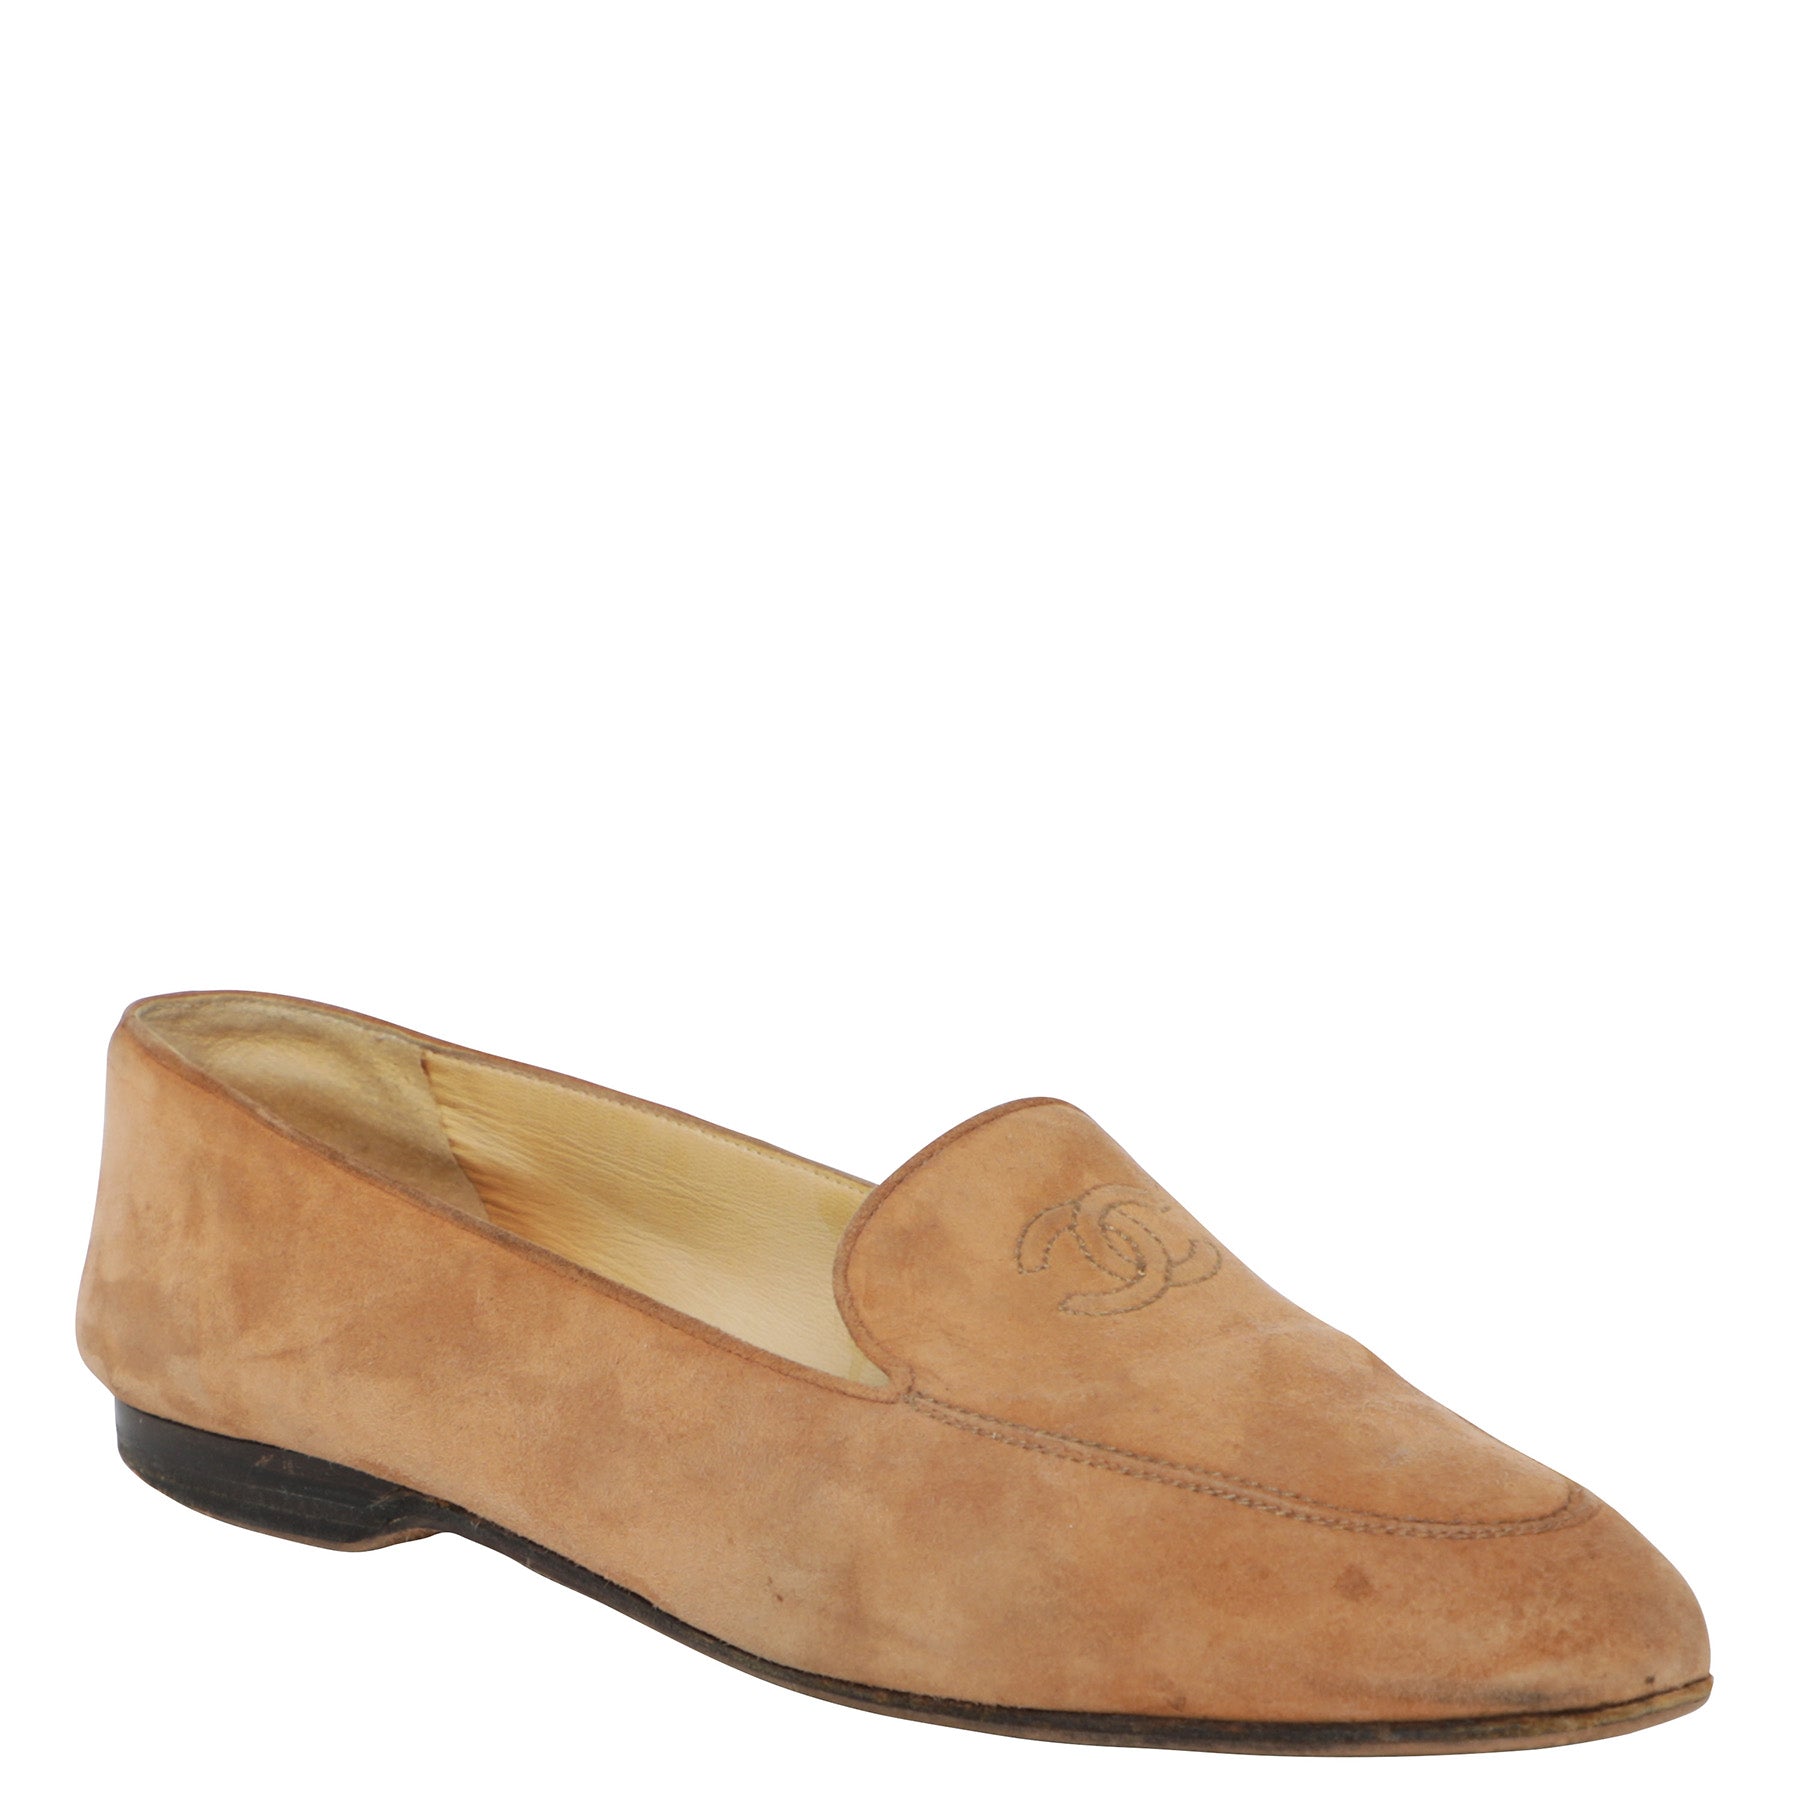 Suede Chanel Penny Loafers 9.5 10 40 – Mint Market